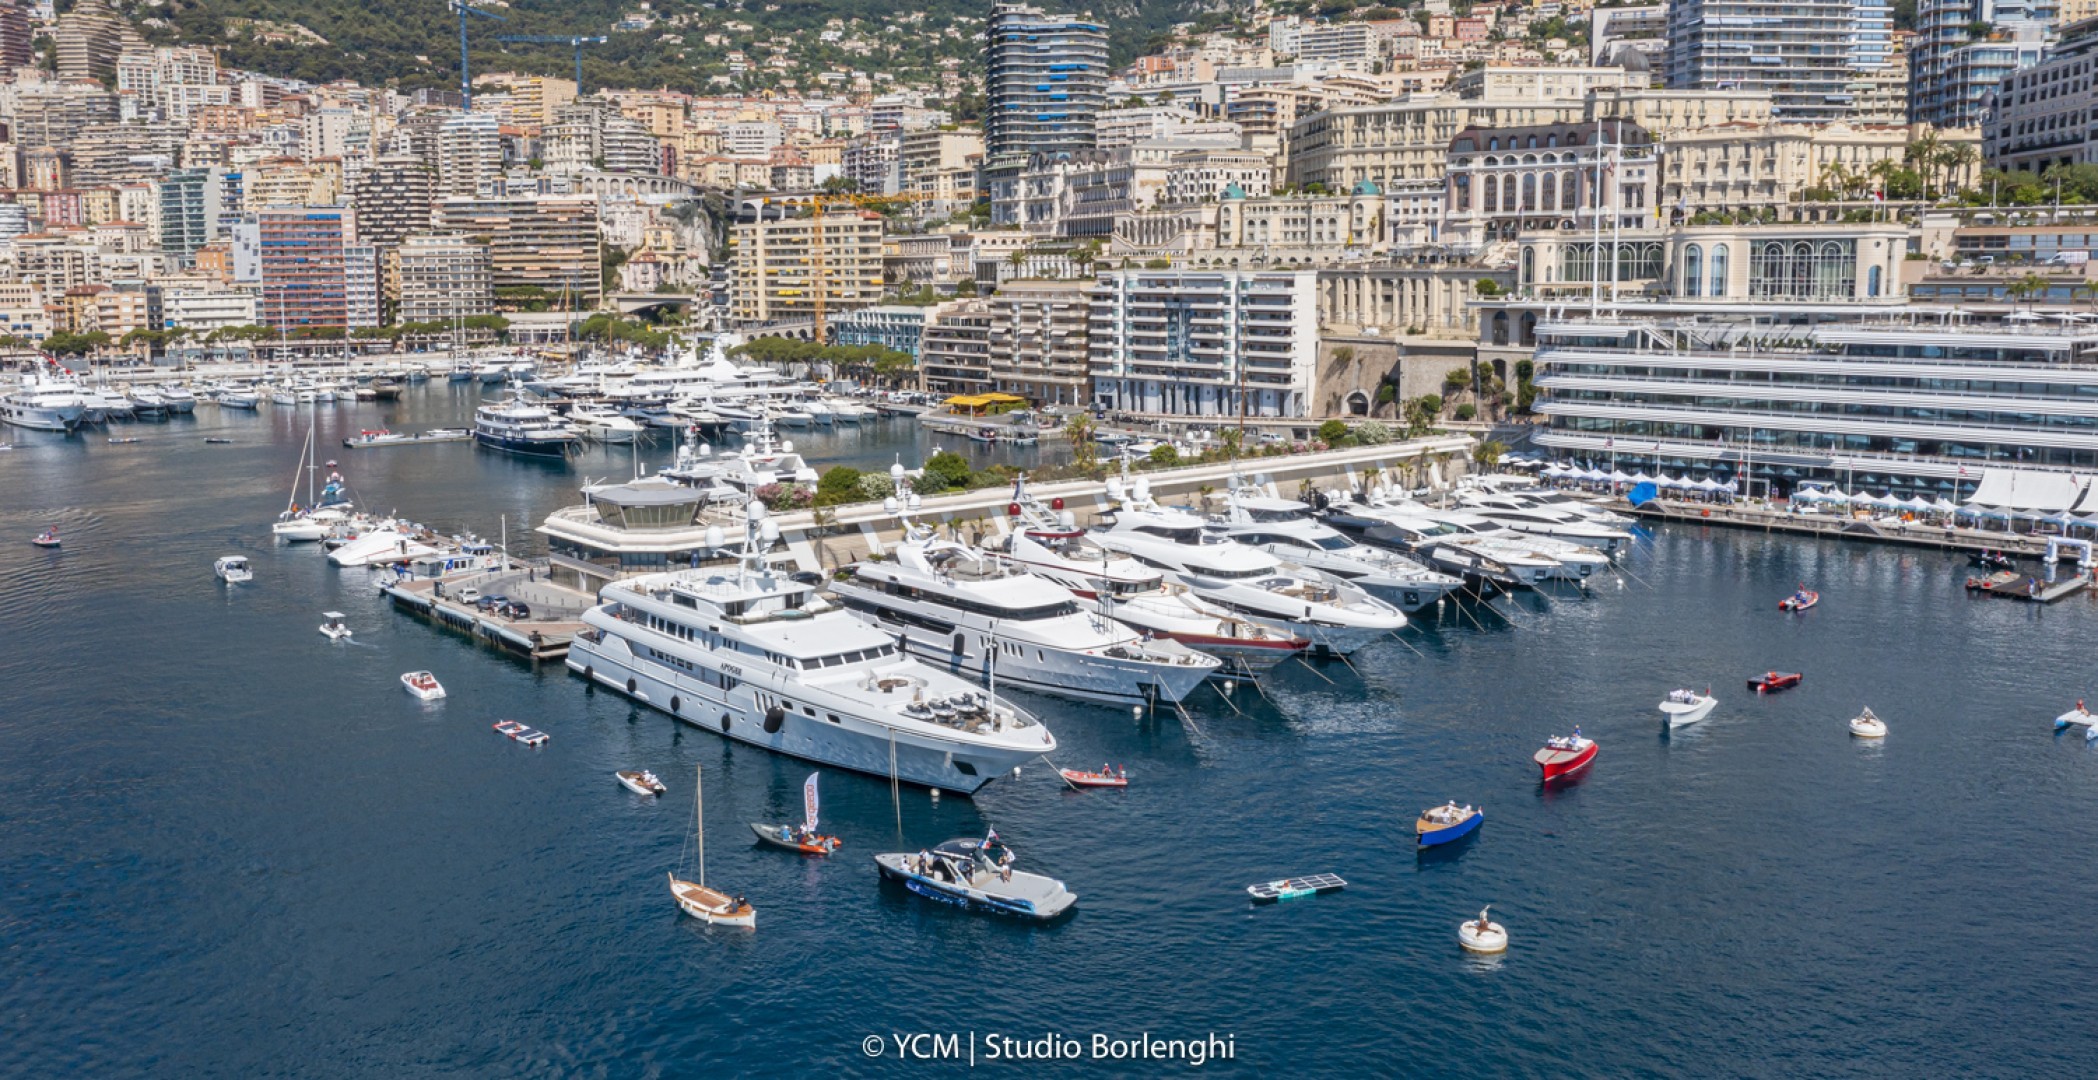 9th Monaco Energy Boat Challenge will be held on 6-9 July 2022